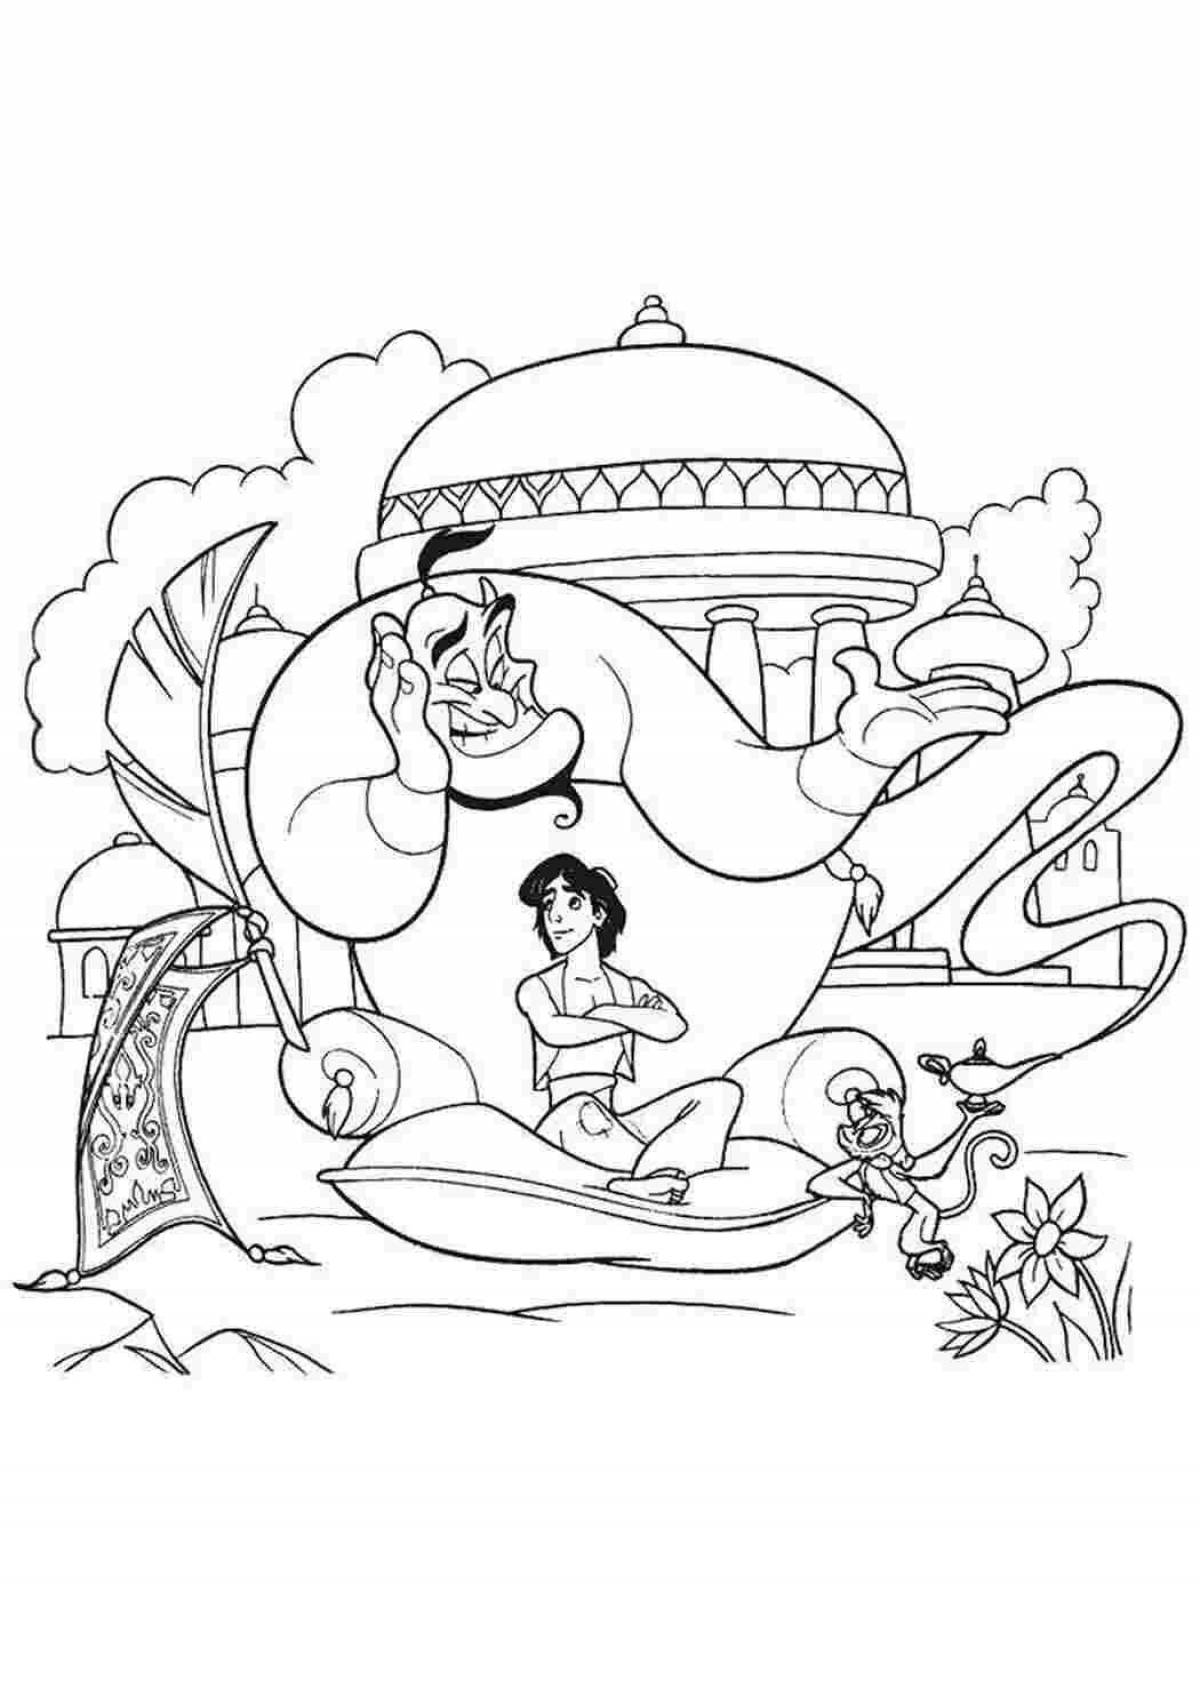 Aladdin's flawless lamp coloring page